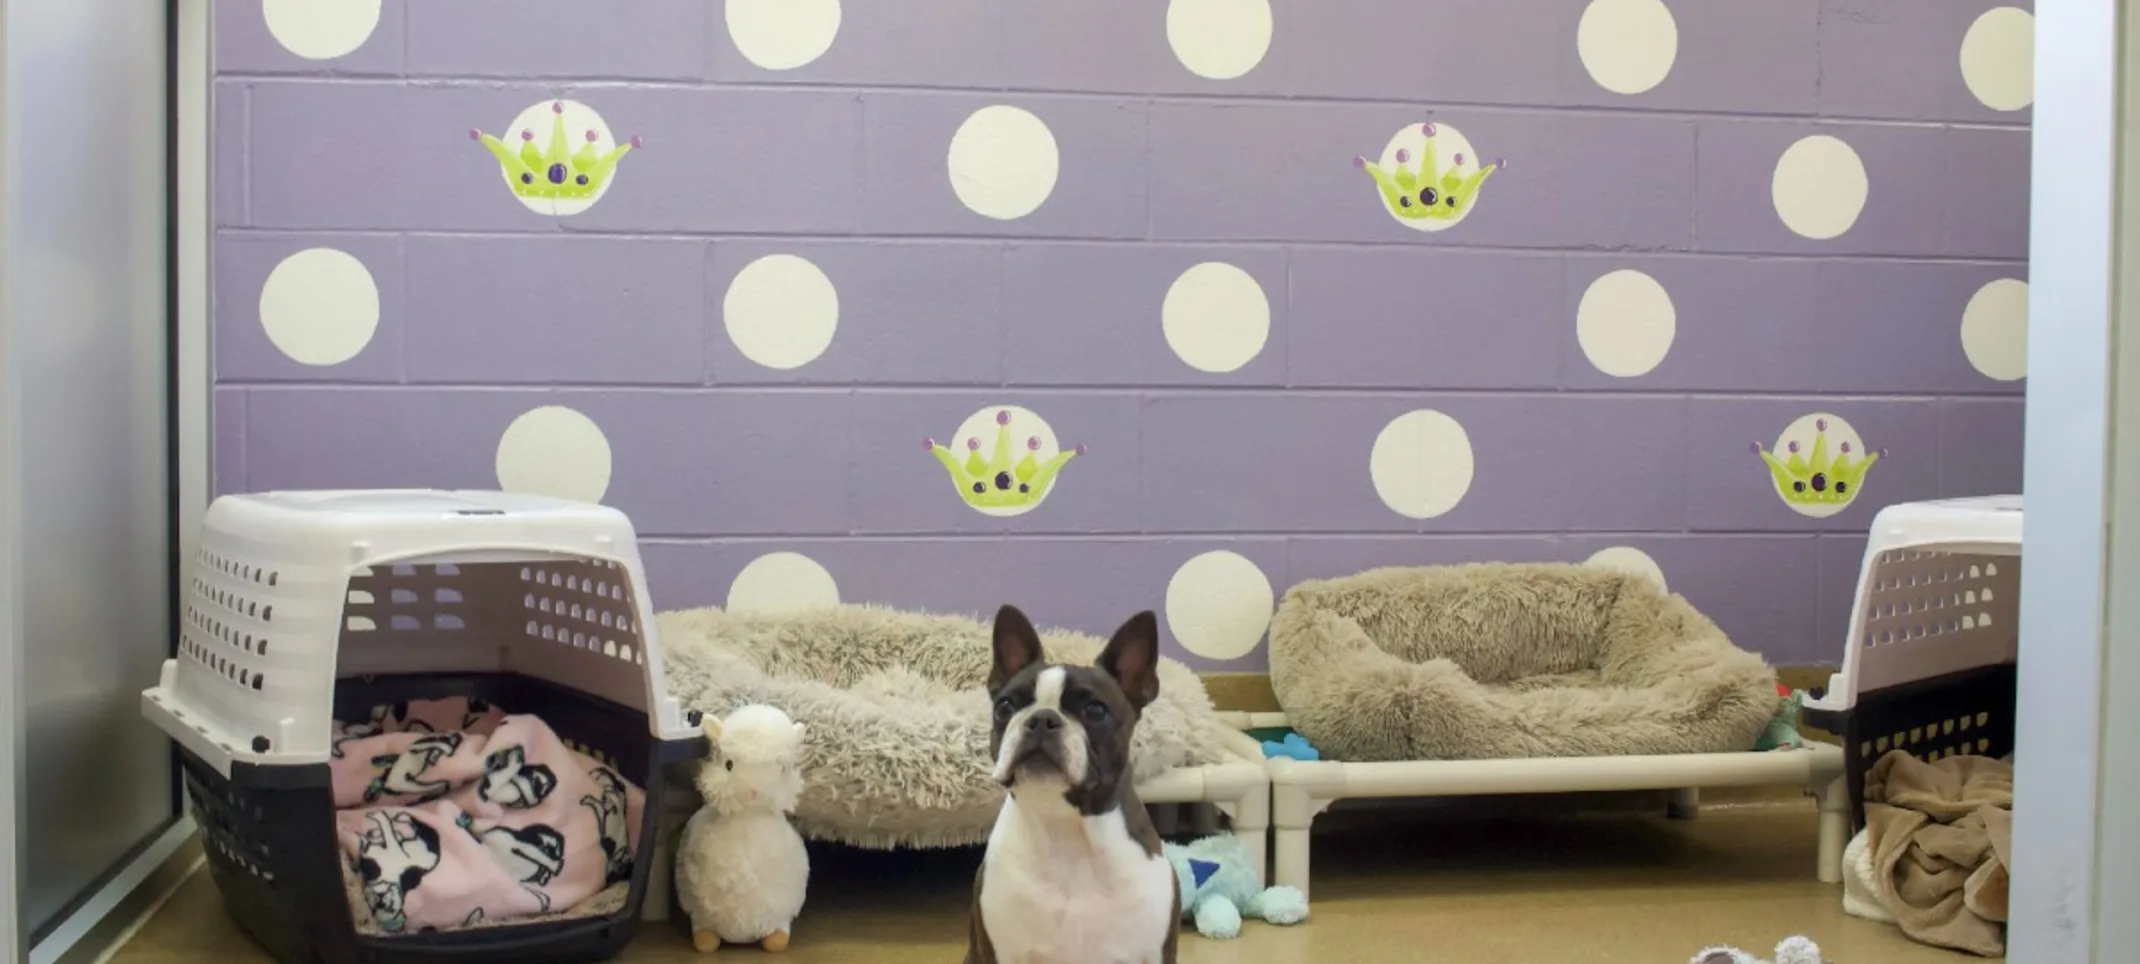 French bulldog in indoor resting area with dog beds, crates, and purple polka dot walls